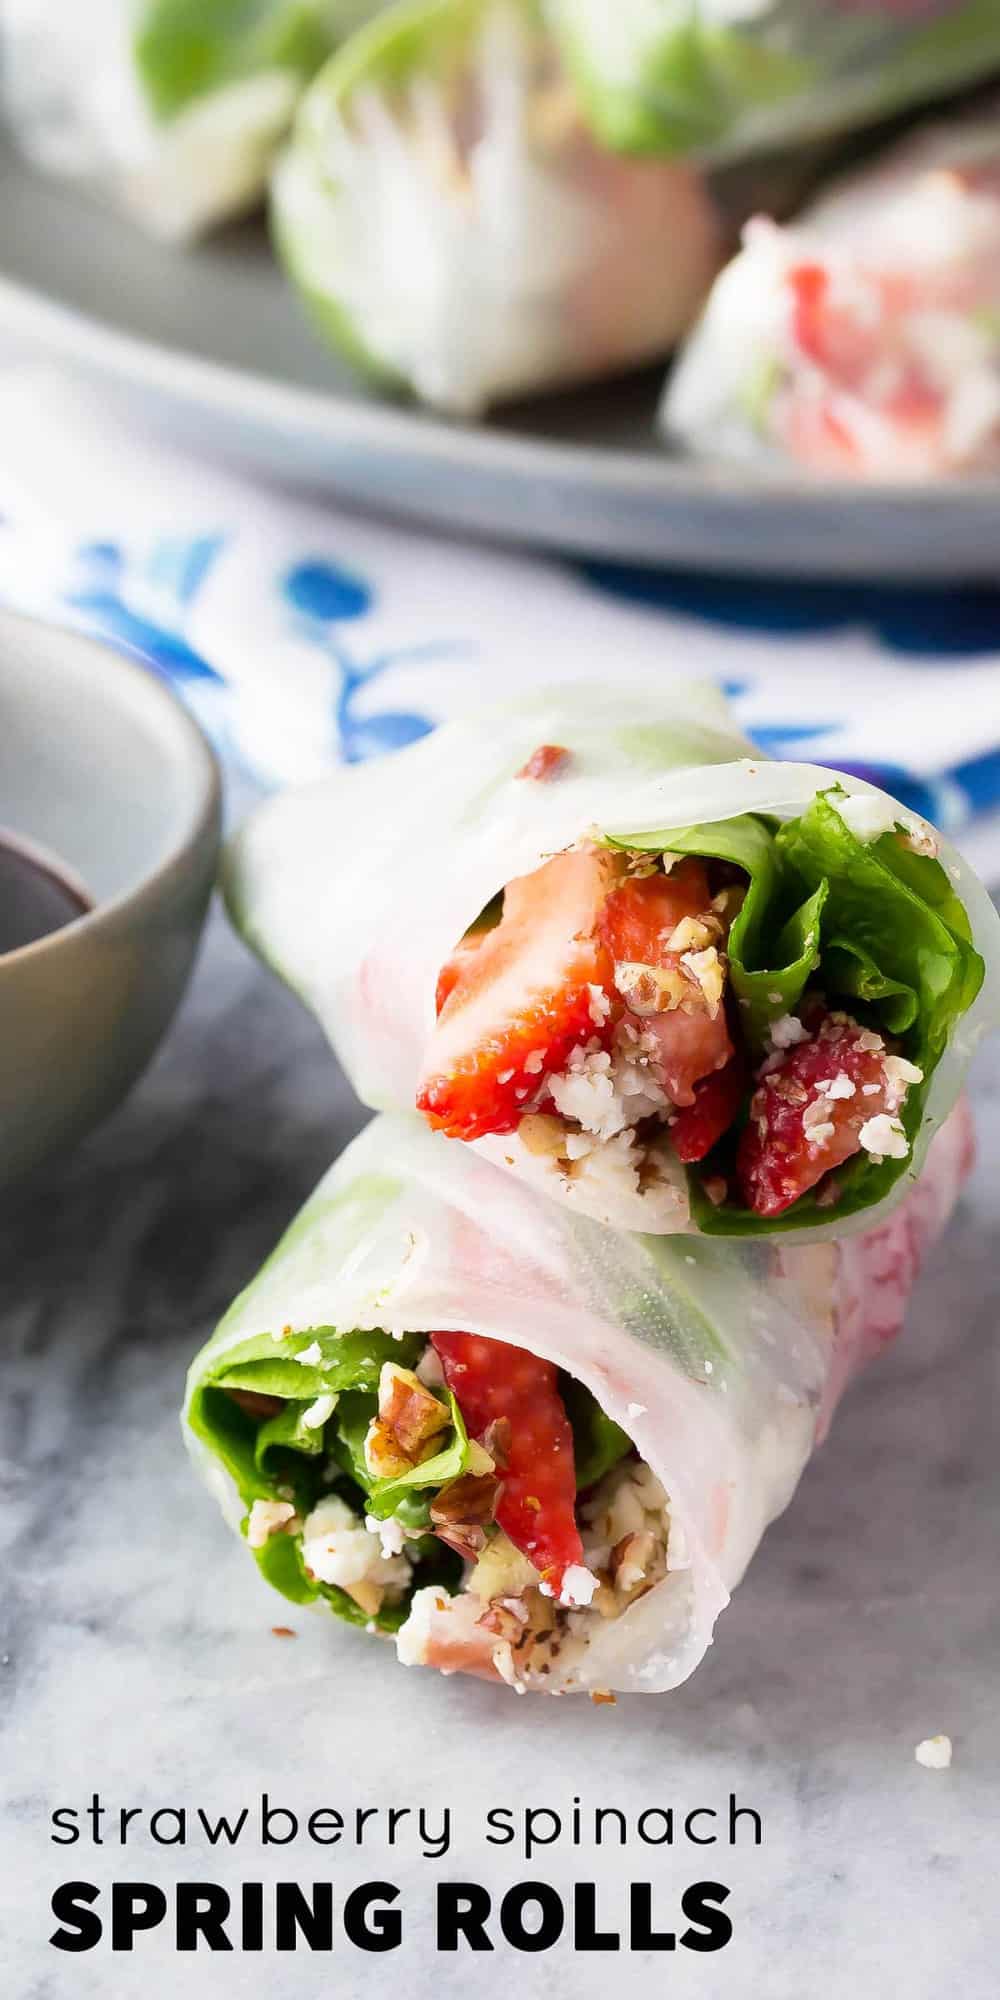 two strawberry spinach spring rolls stacked on each other showing the filling